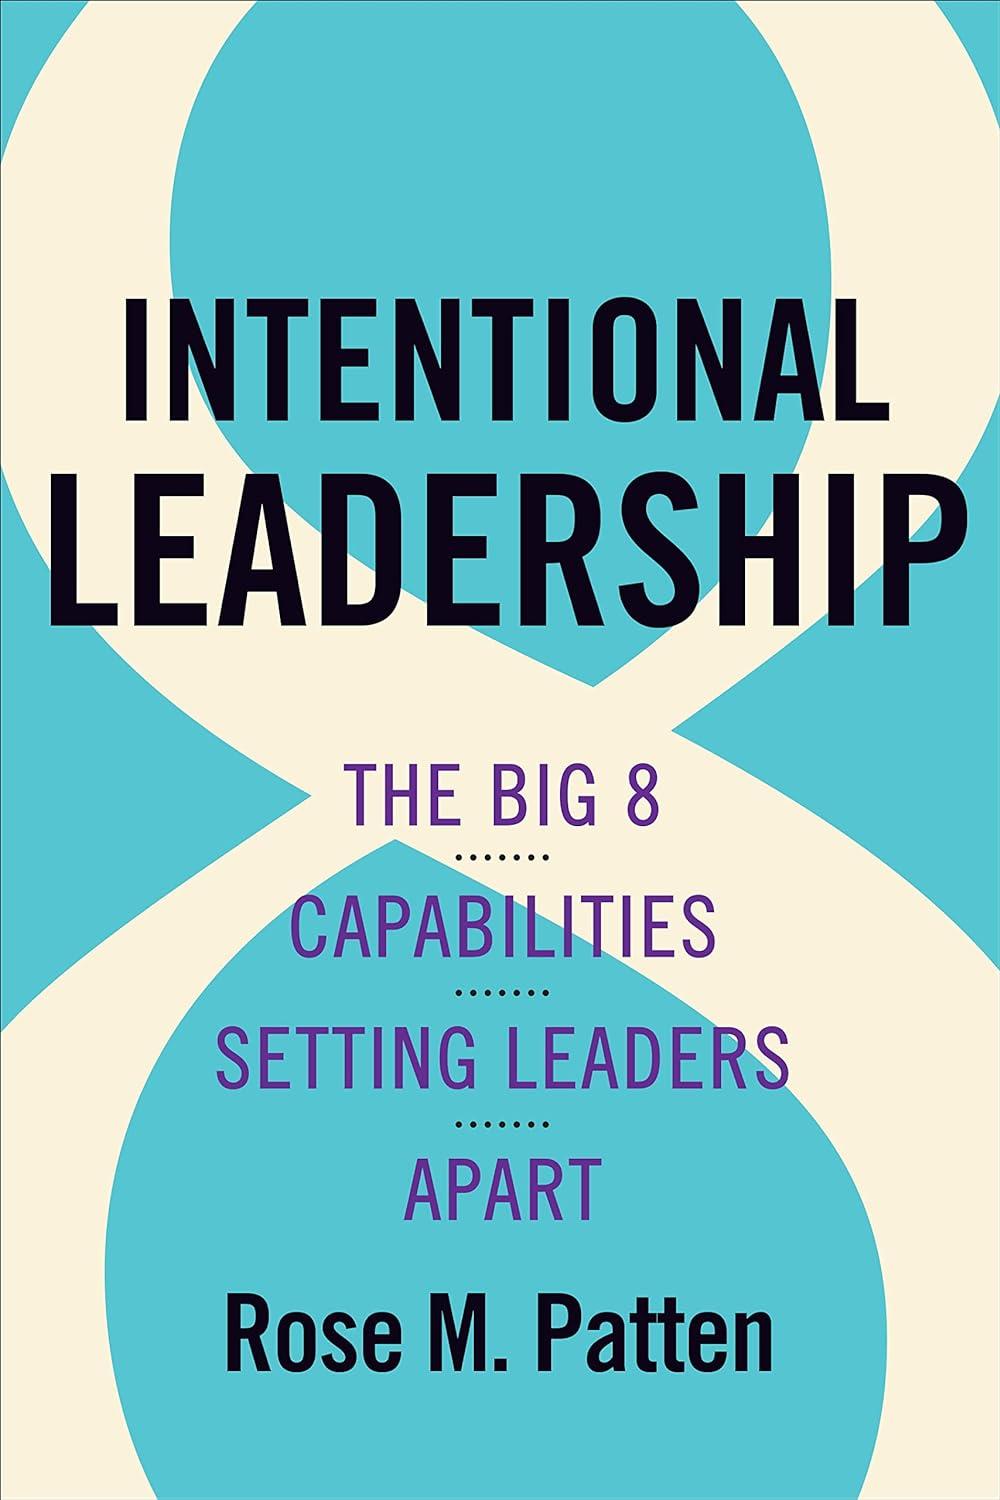 intentional leadership the big 8 capabilities setting leaders apart 1st edition rose m. patten 1487508875,